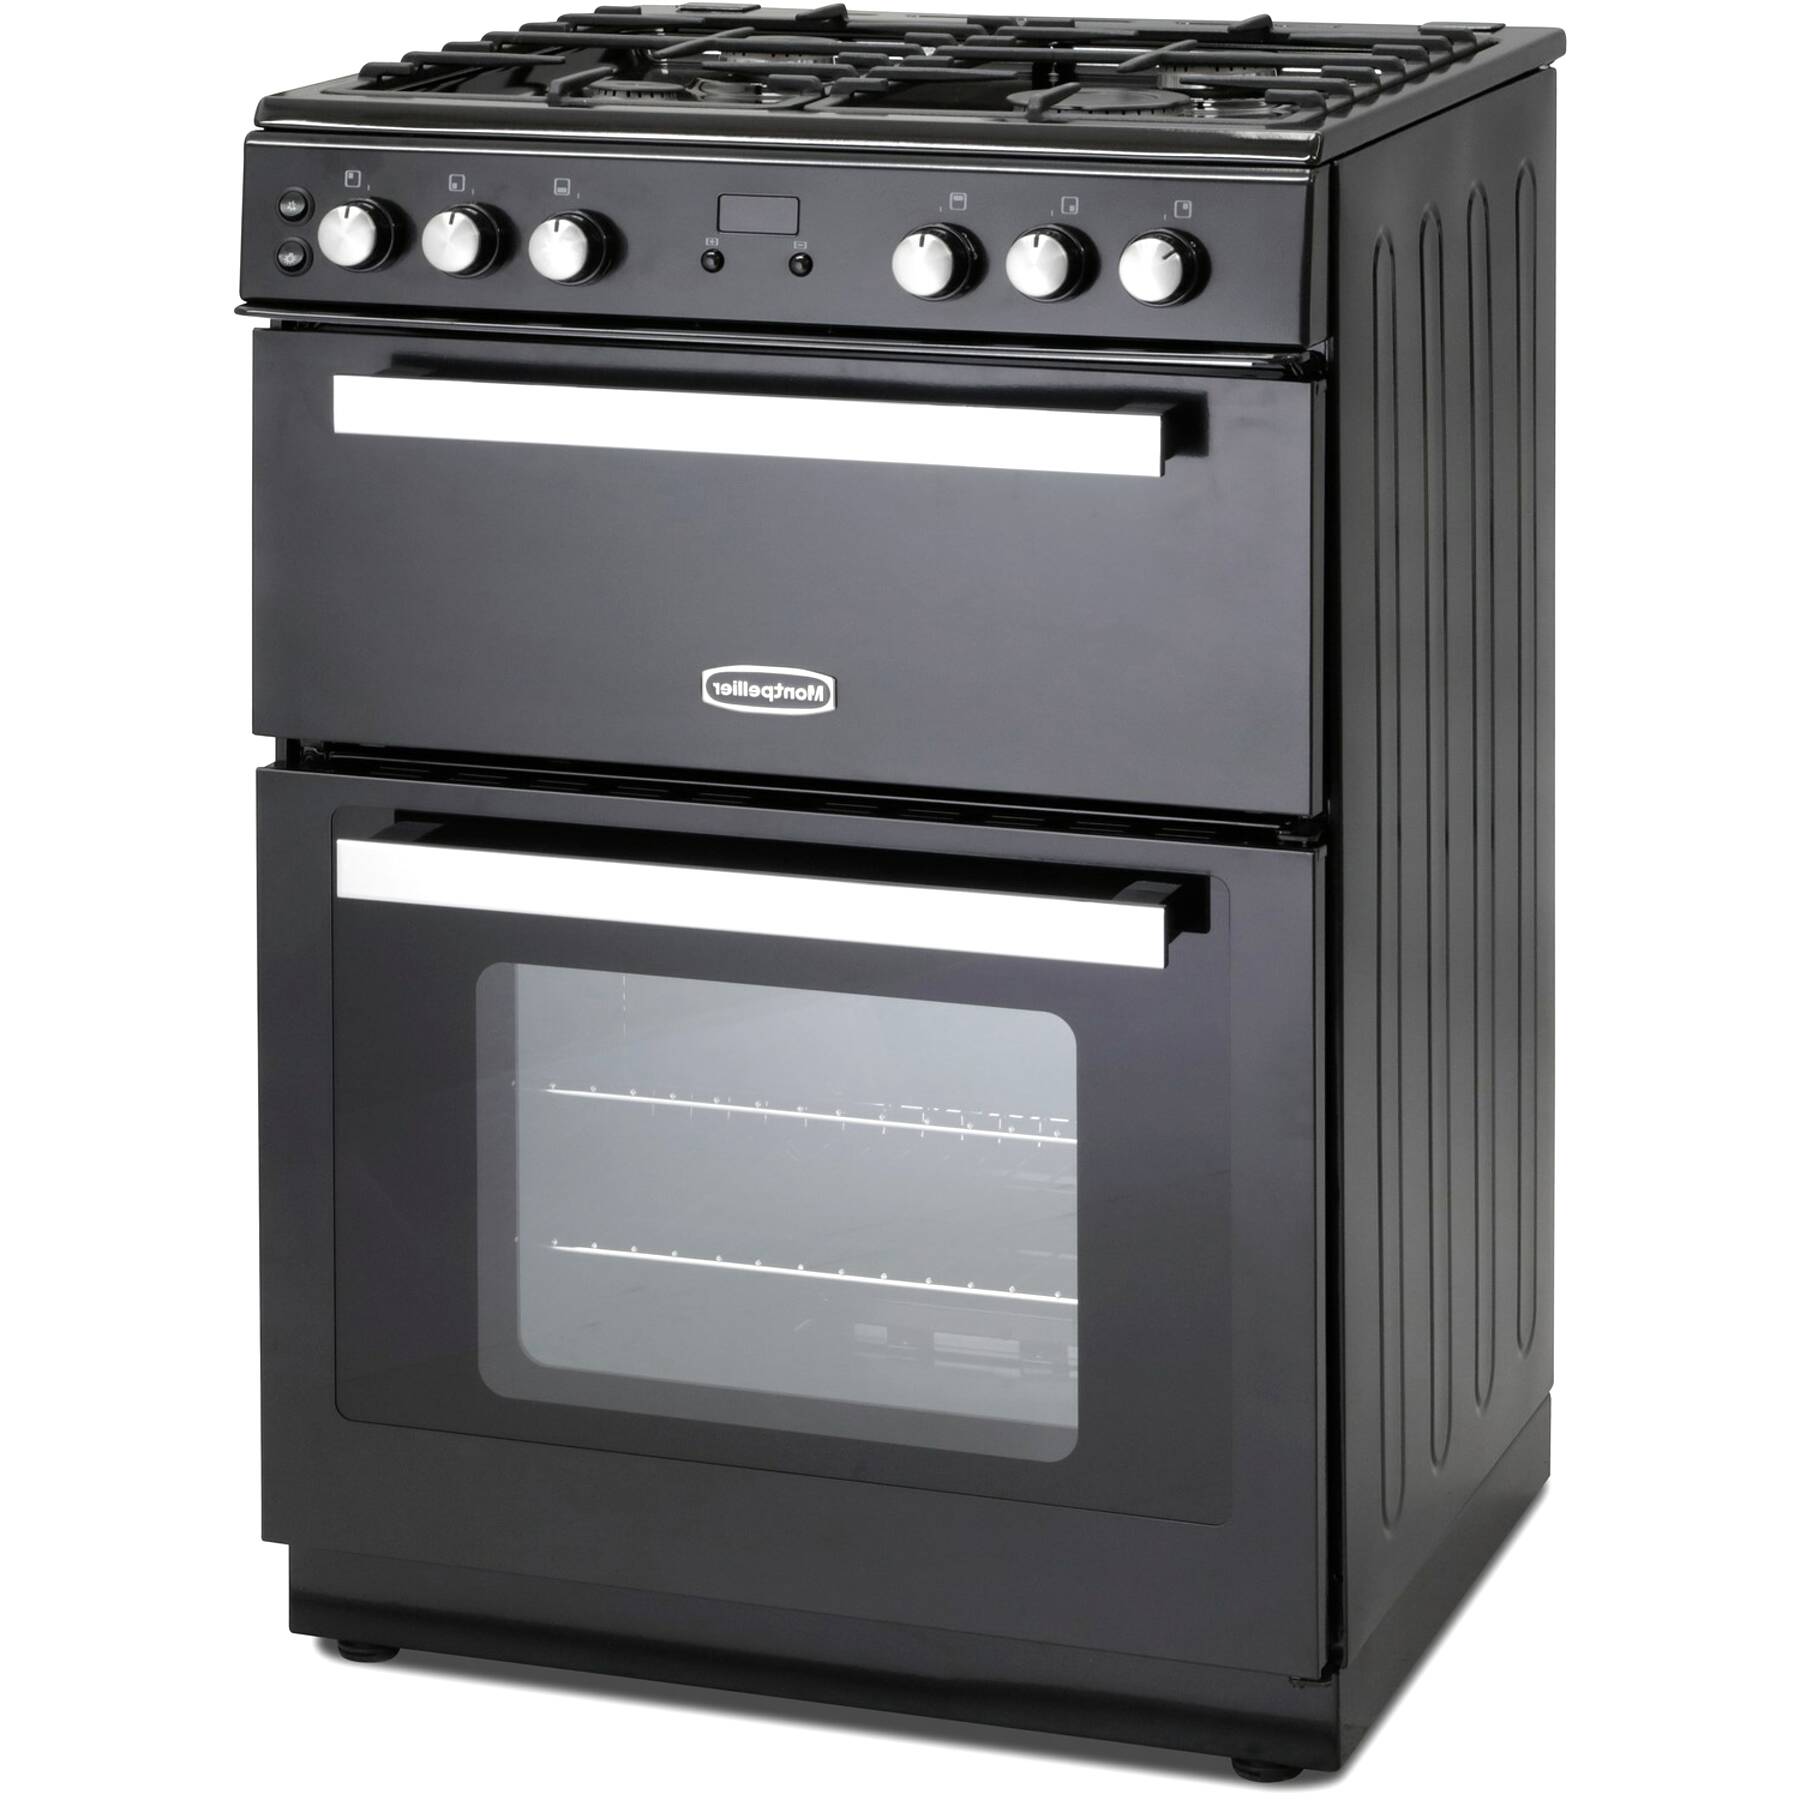 Double oven gas cookers for sale